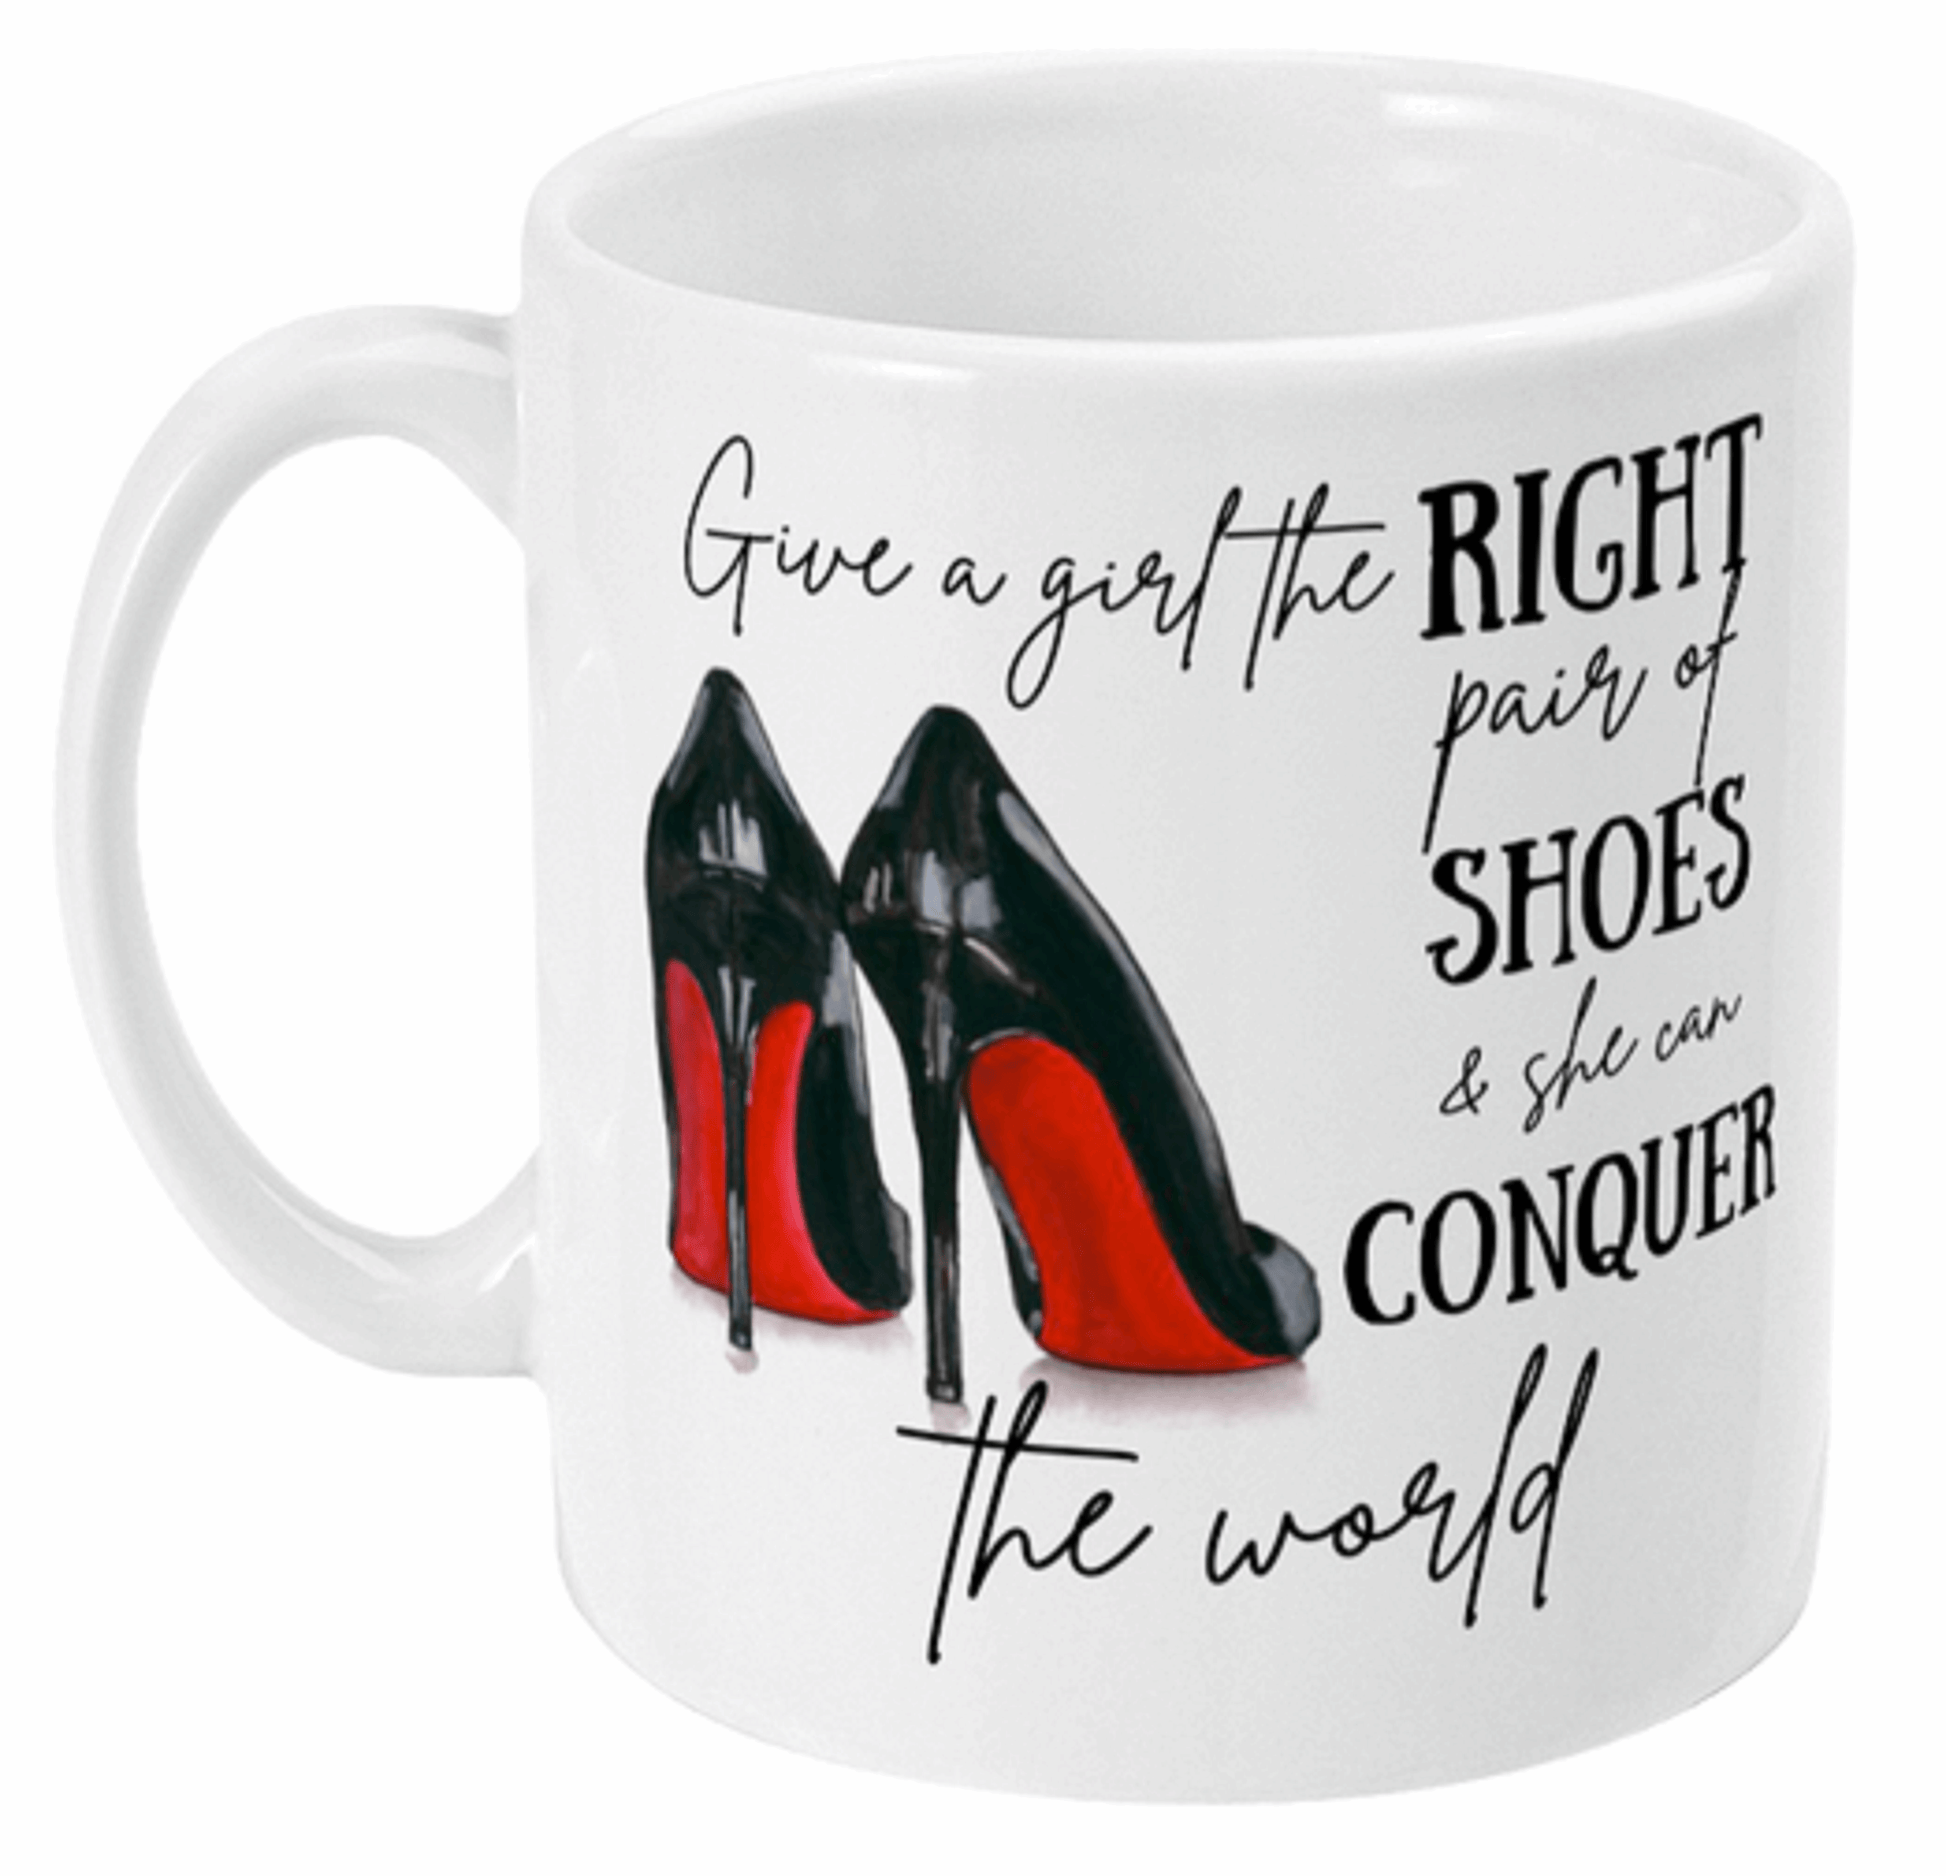  Give A Girl The Right Kind of Shoes Mug by Free Spirit Accessories sold by Free Spirit Accessories